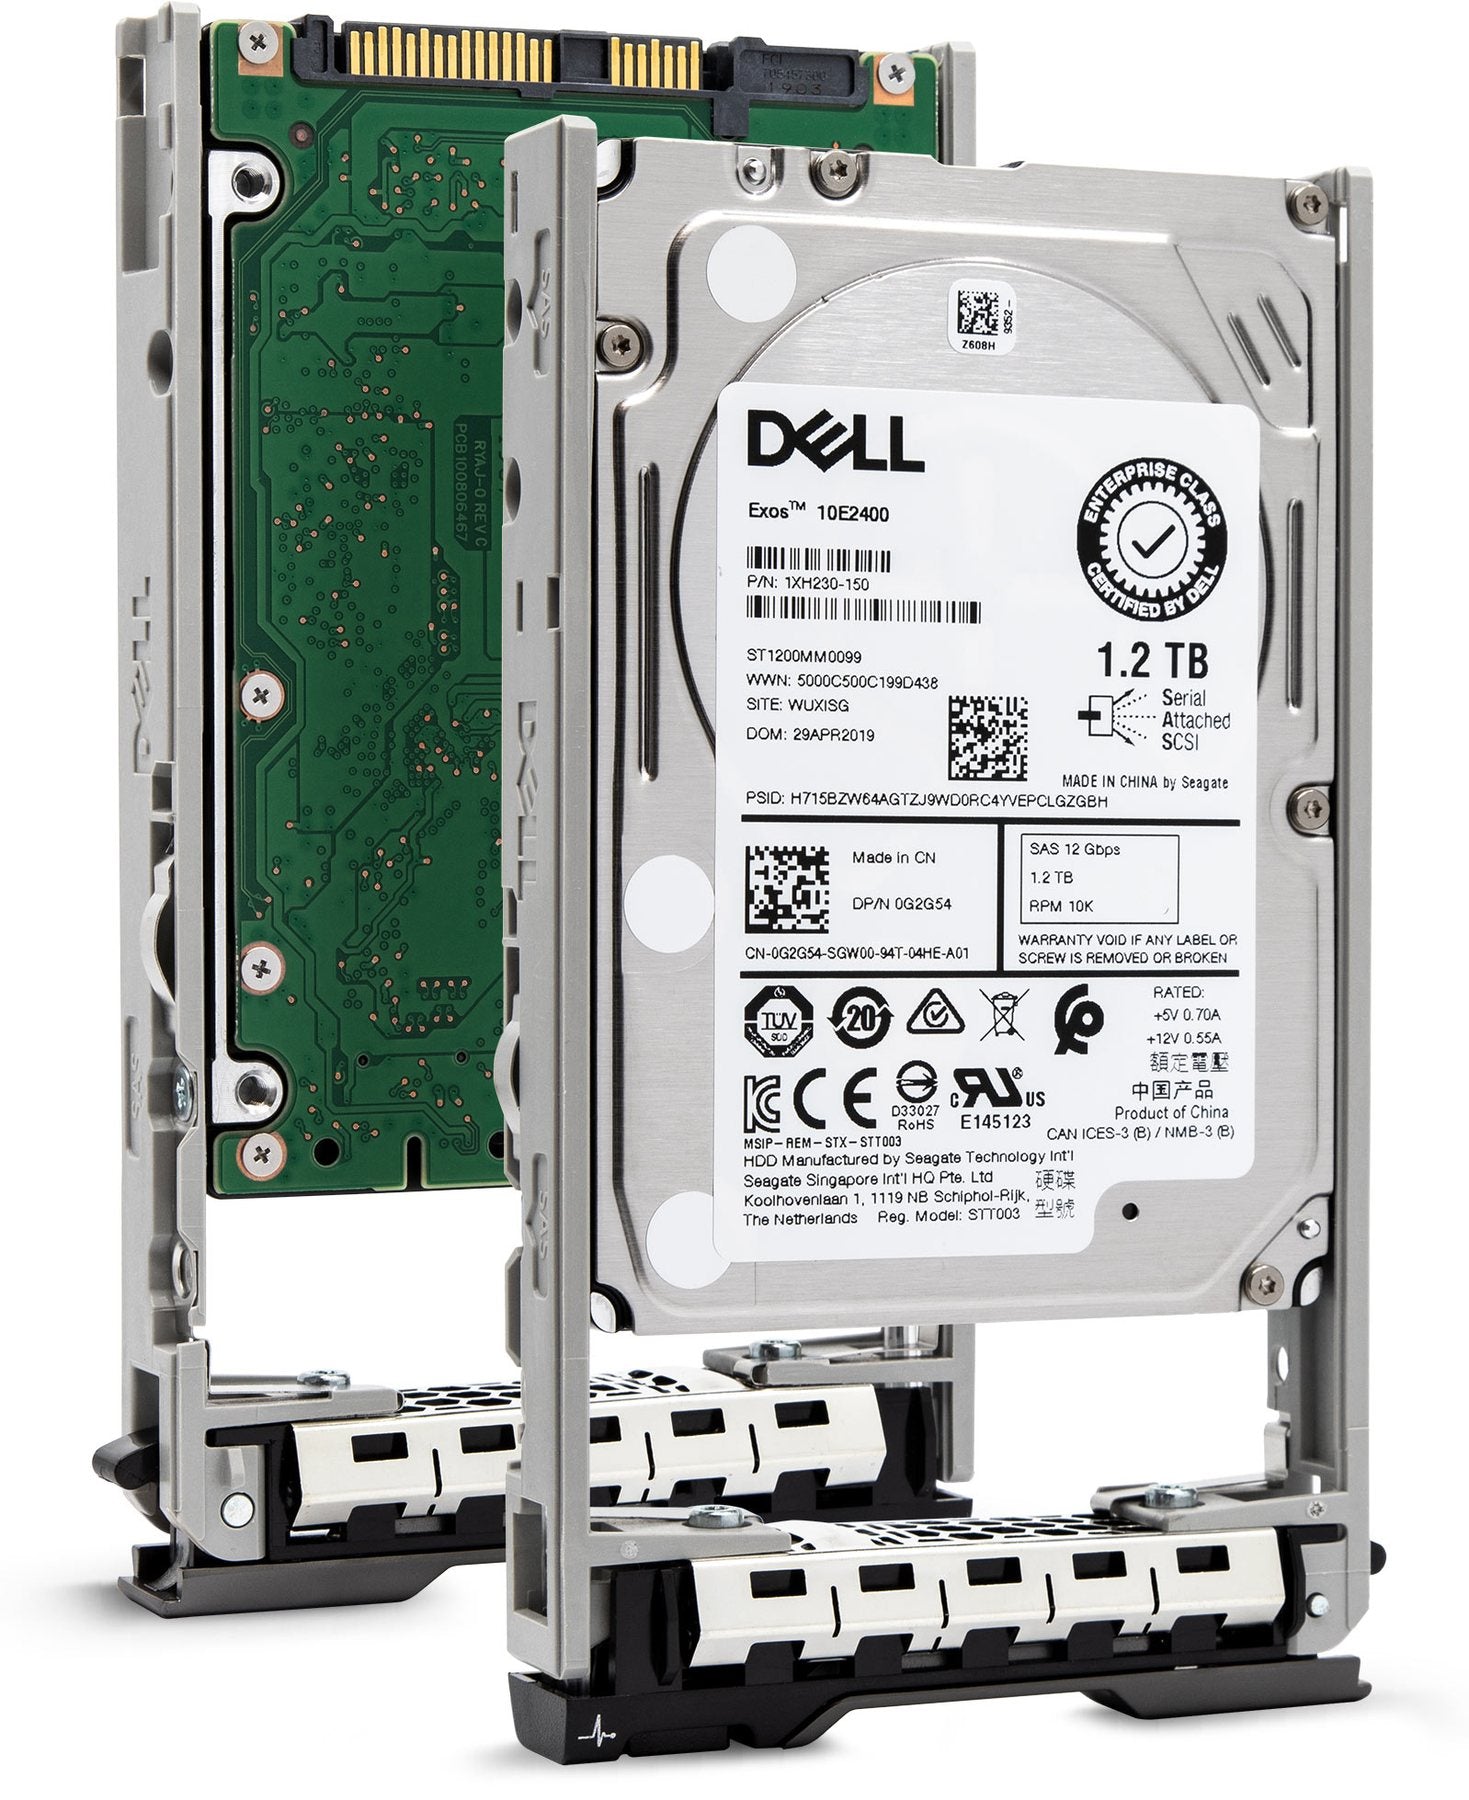 Dell G13 4RY5N 1.2TB 10K RPM SAS 12Gb/s 512n 2.5" Manufacturer Recertified HDD